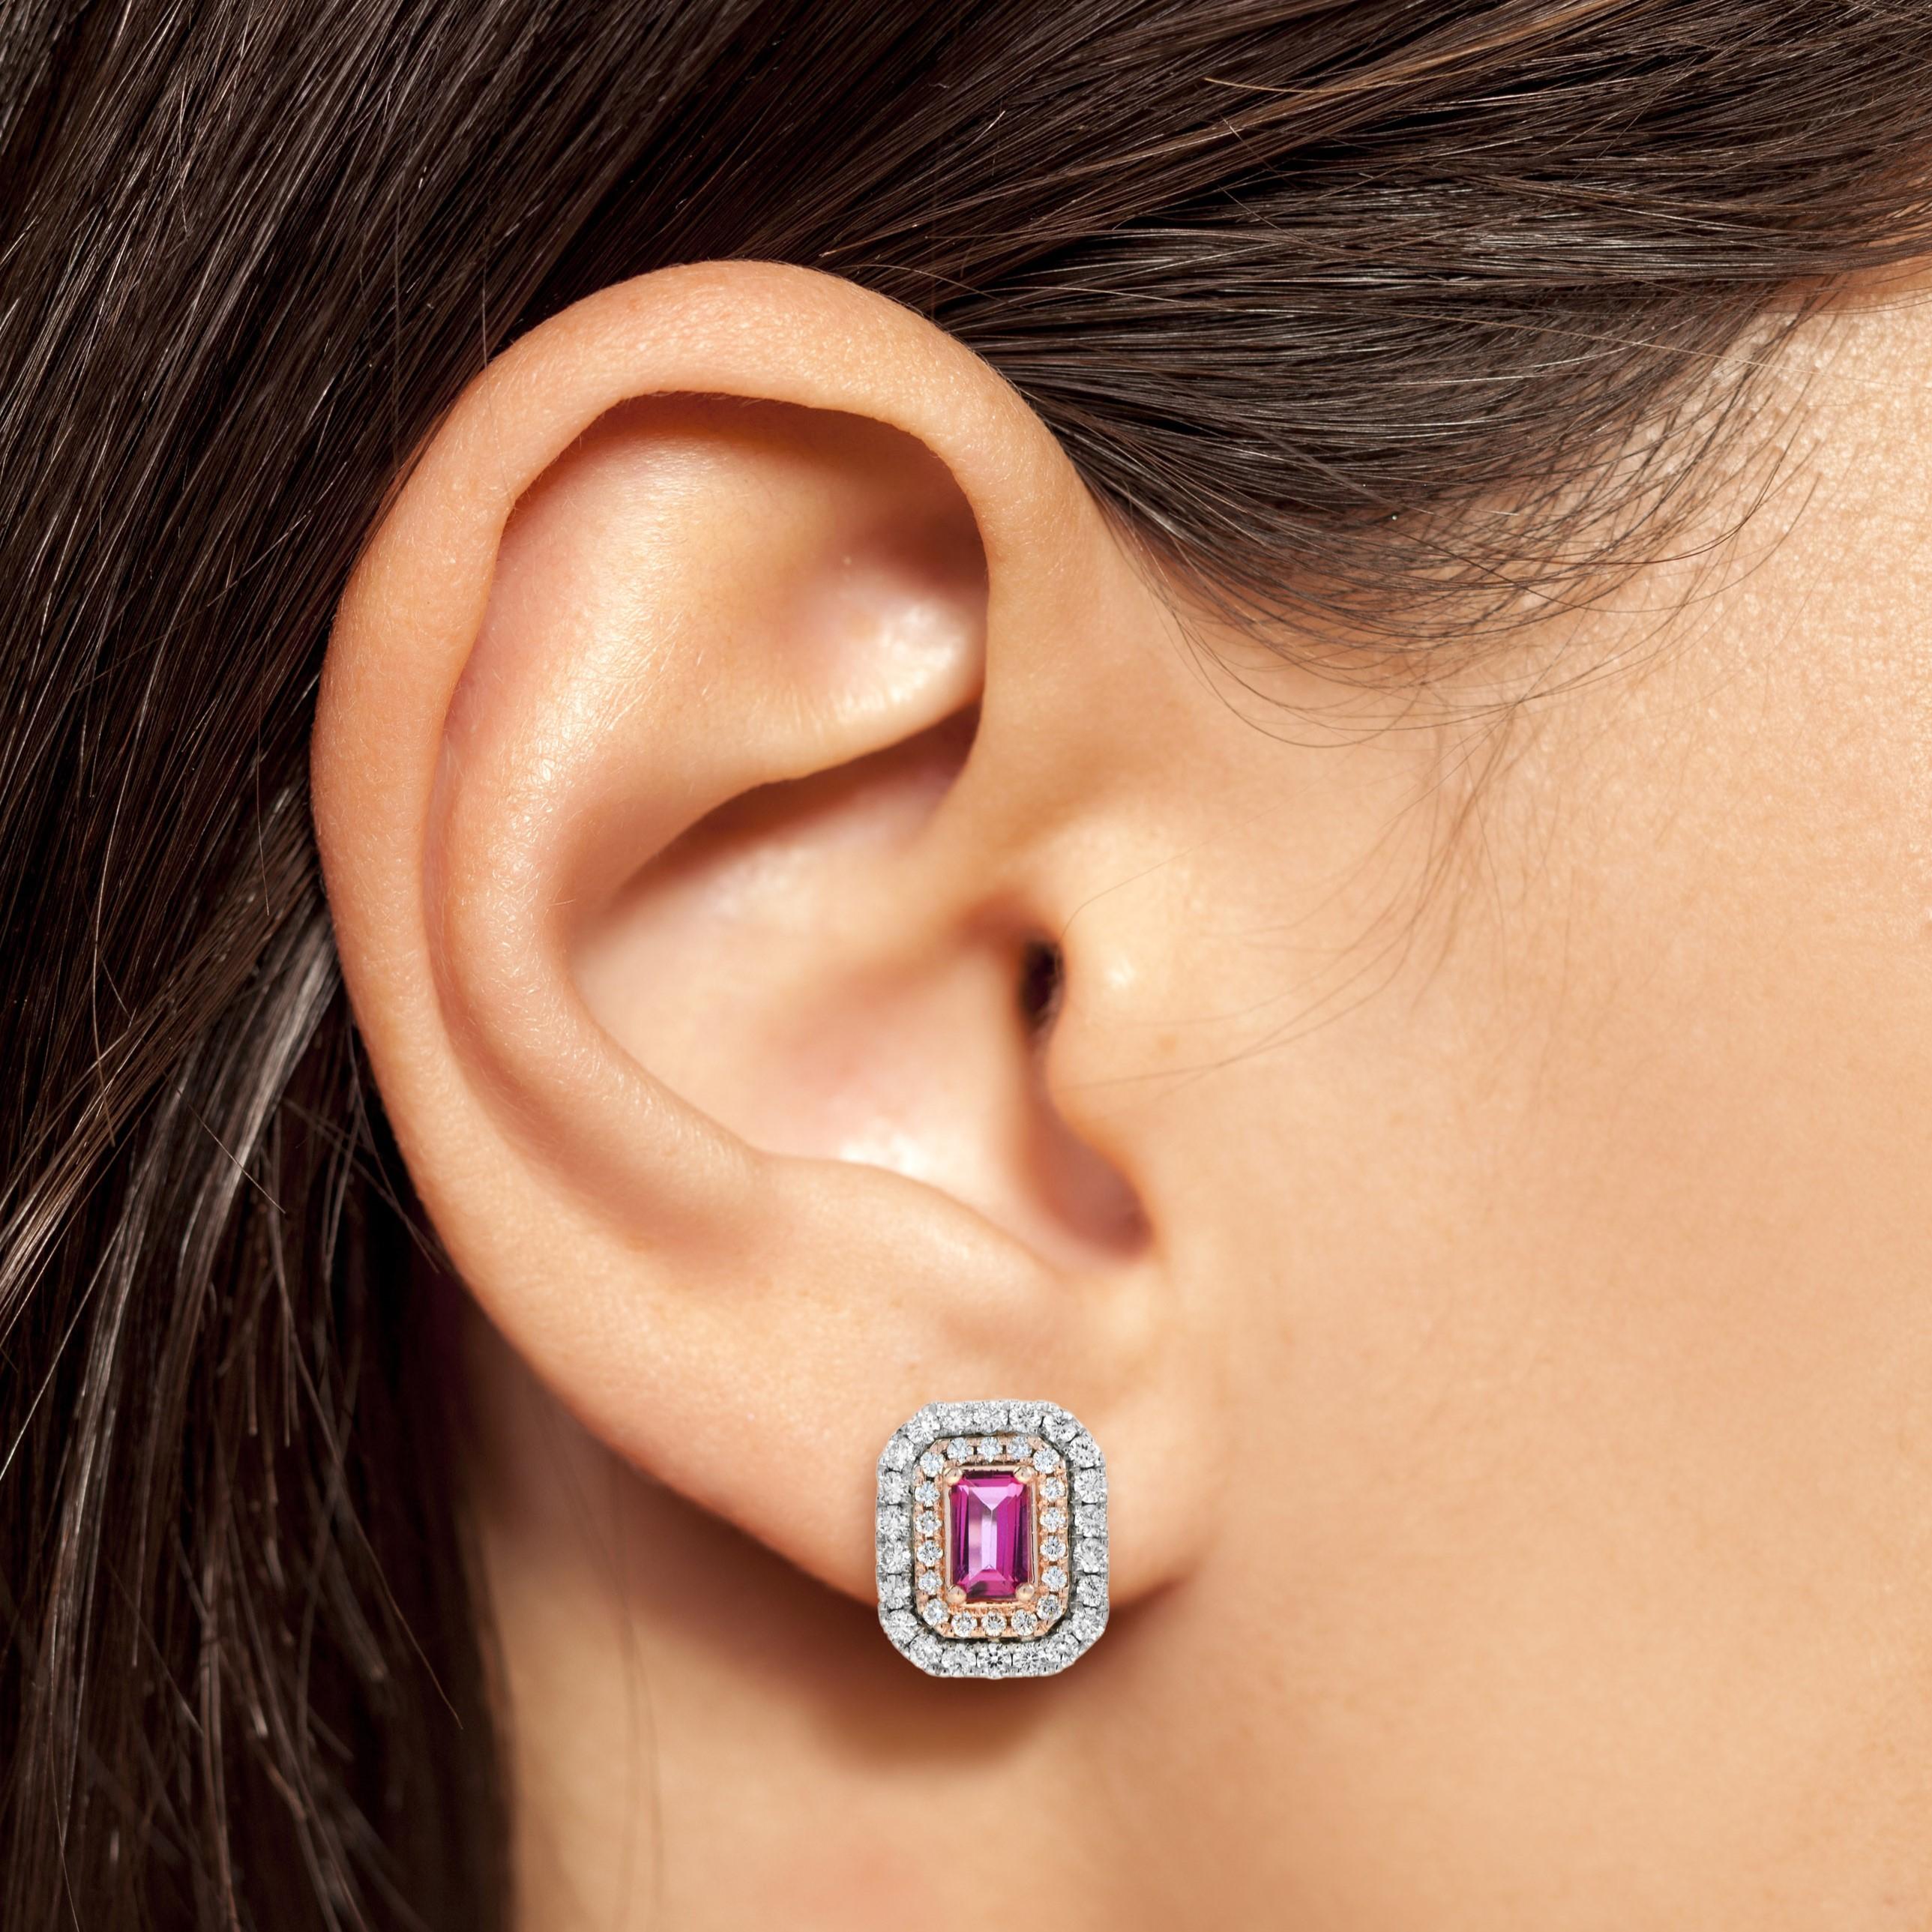 The two-tone version of standout double halo stud earrings are designed to hold 0.4 carat emerald cut pink sapphire for each center stone. The outer halo is in white gold while inner halo is rose gold. A truly spectacular stud earrings! Wear it with